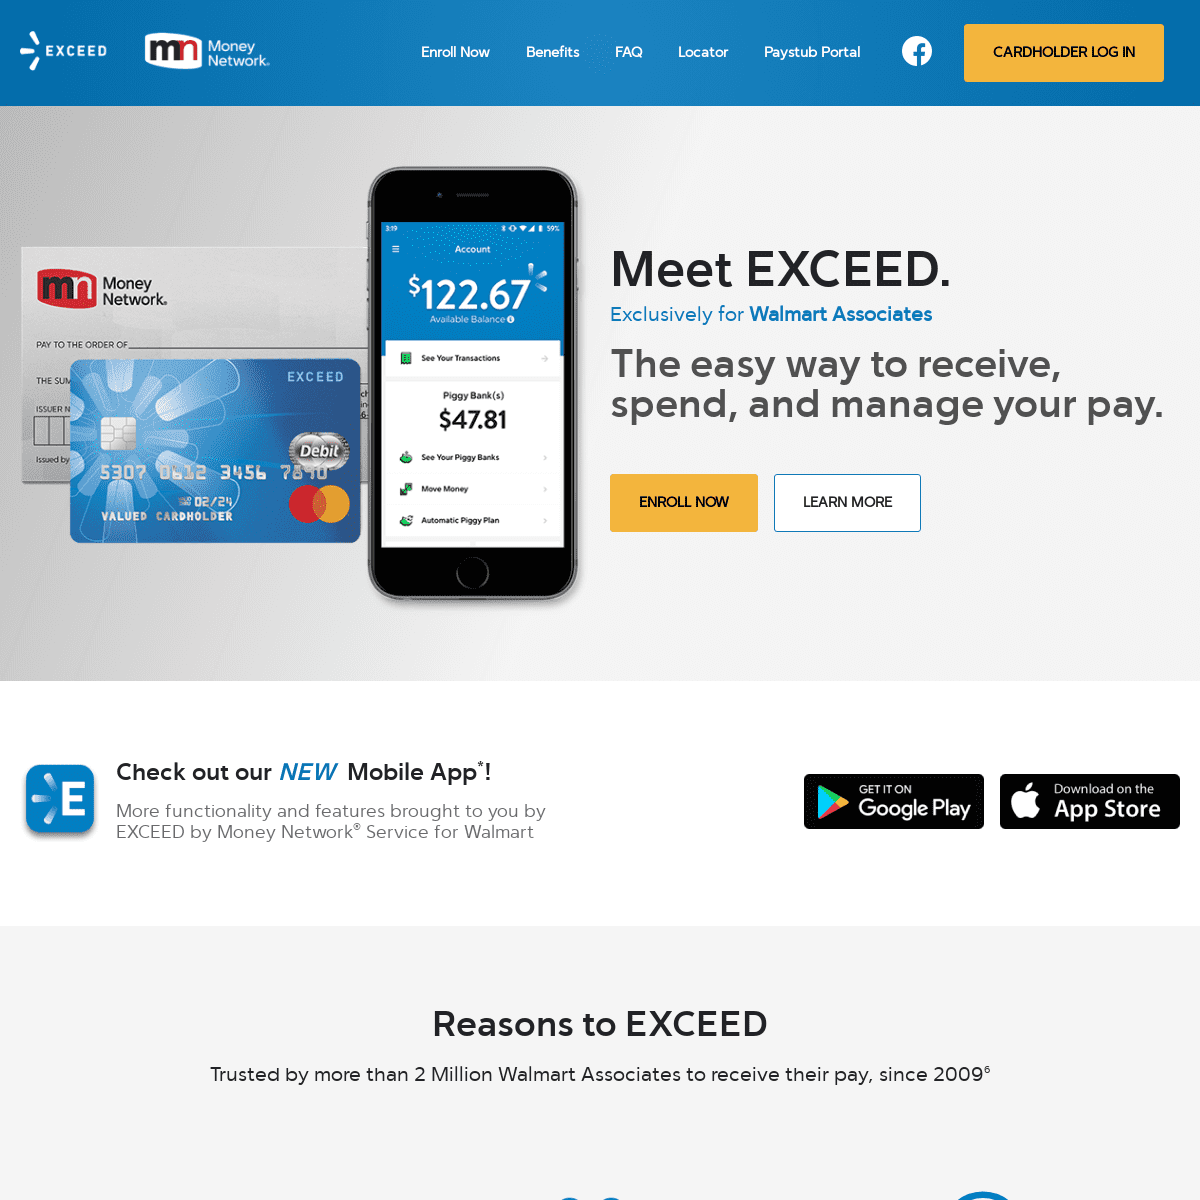 A complete backup of exceedcard.com